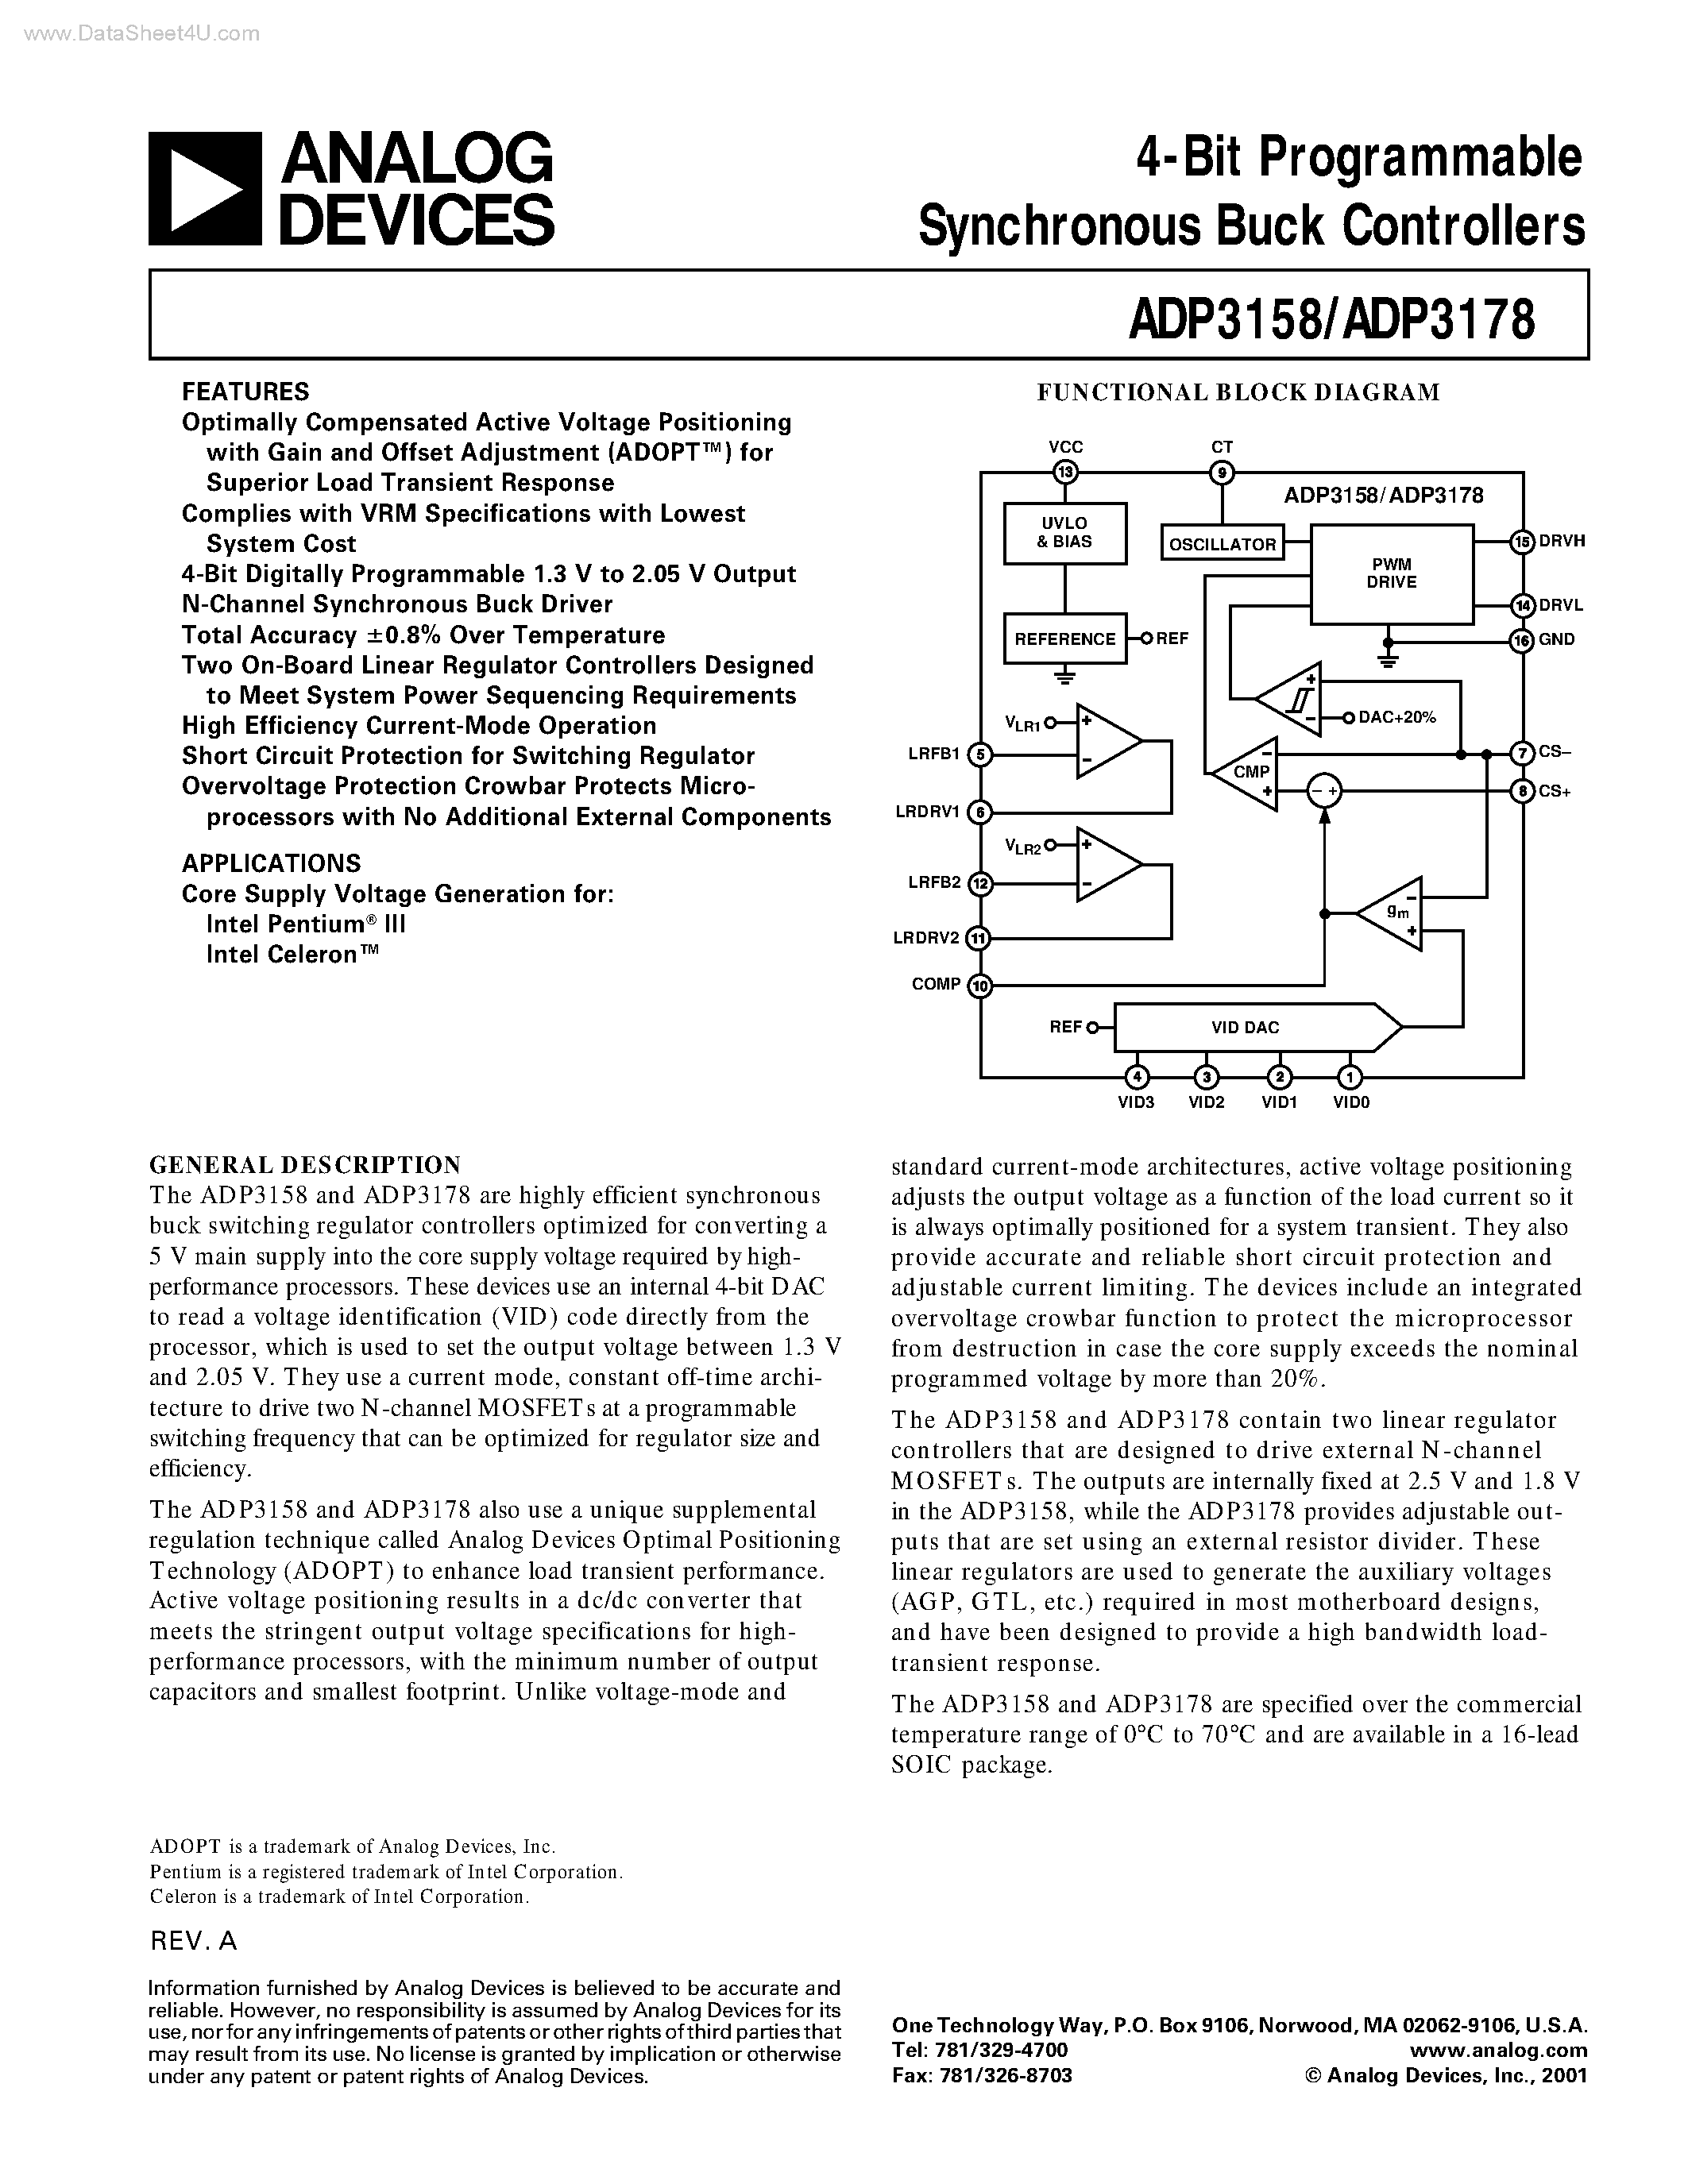 Datasheet ADP3158 - (ADP3158 / ADP3178) 4-Bit Programmable Synchronous Buck Controllers page 1